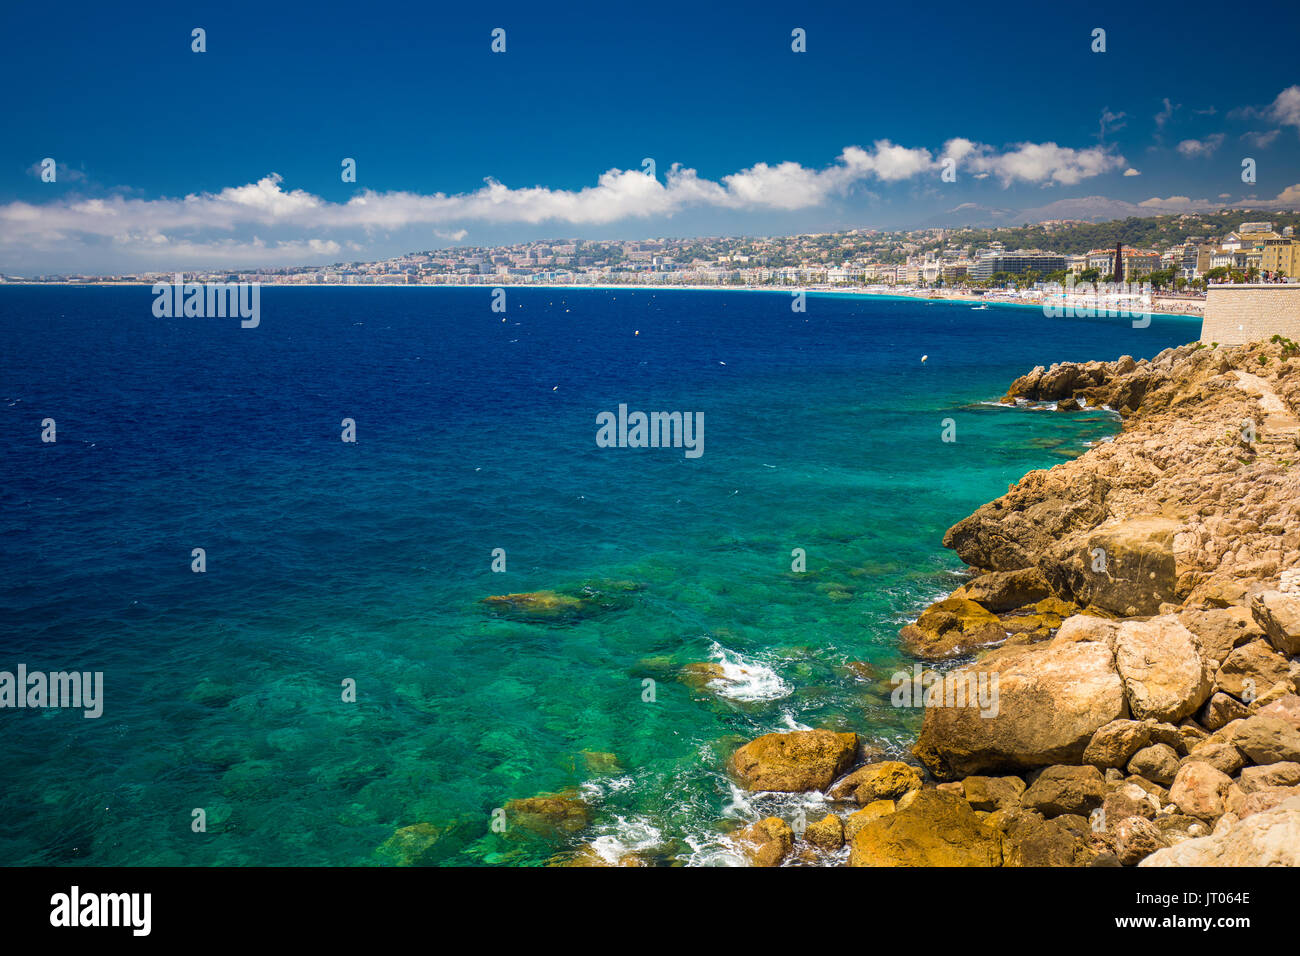 Beach promenade in old city center of Nice, French riviera, France, Europe. Stock Photo